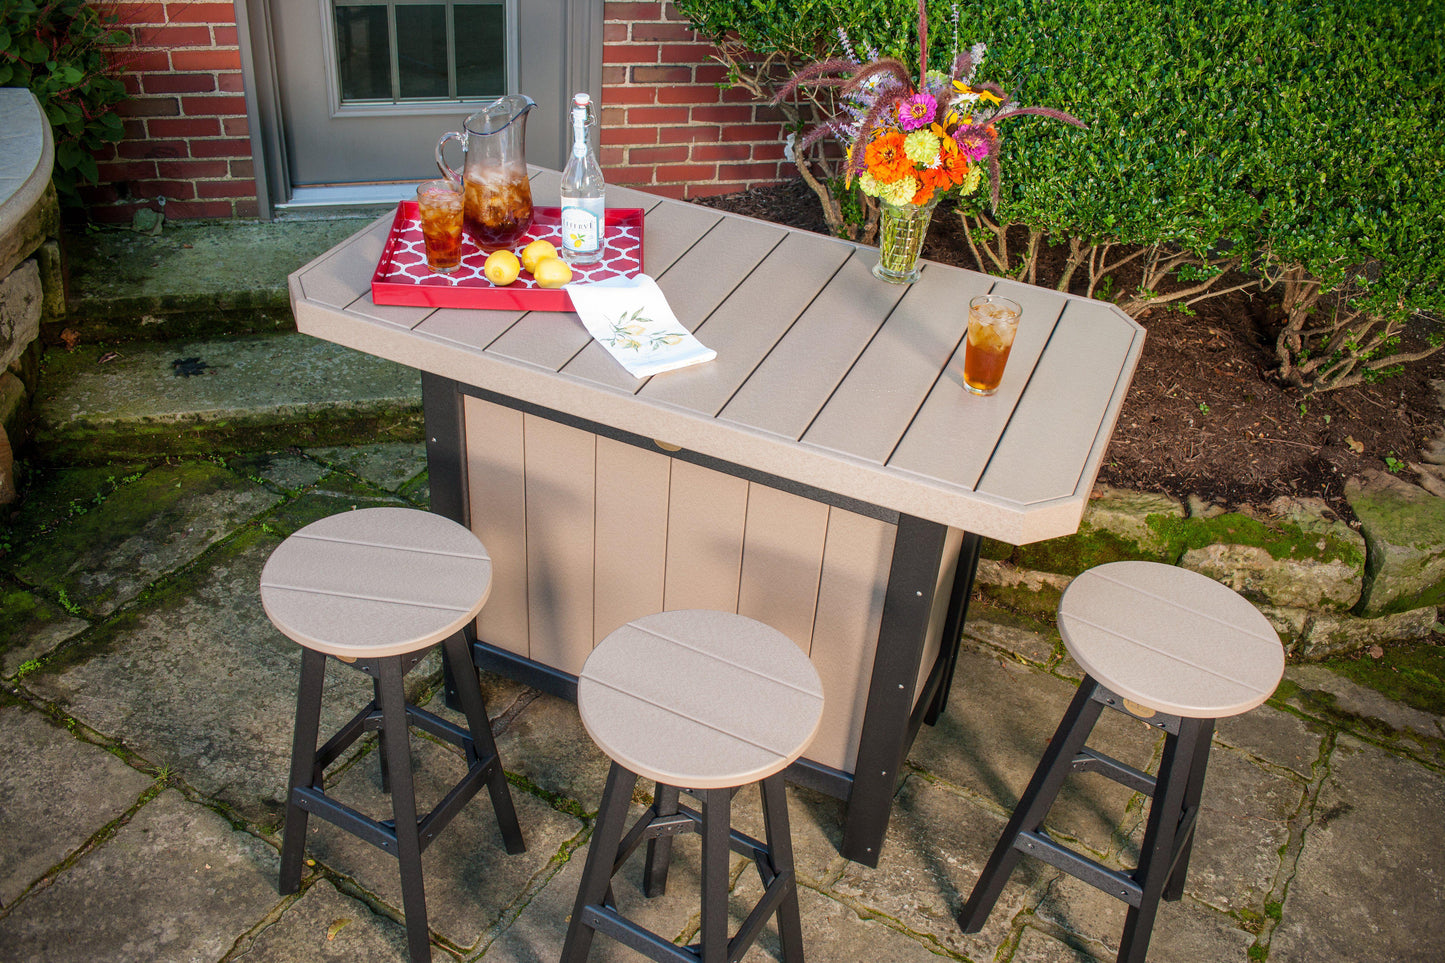 LuxCraft Recycled Plastic Serving Bar (Stools sold separately) - LEAD TIME TO SHIP 3 TO 4 WEEKS